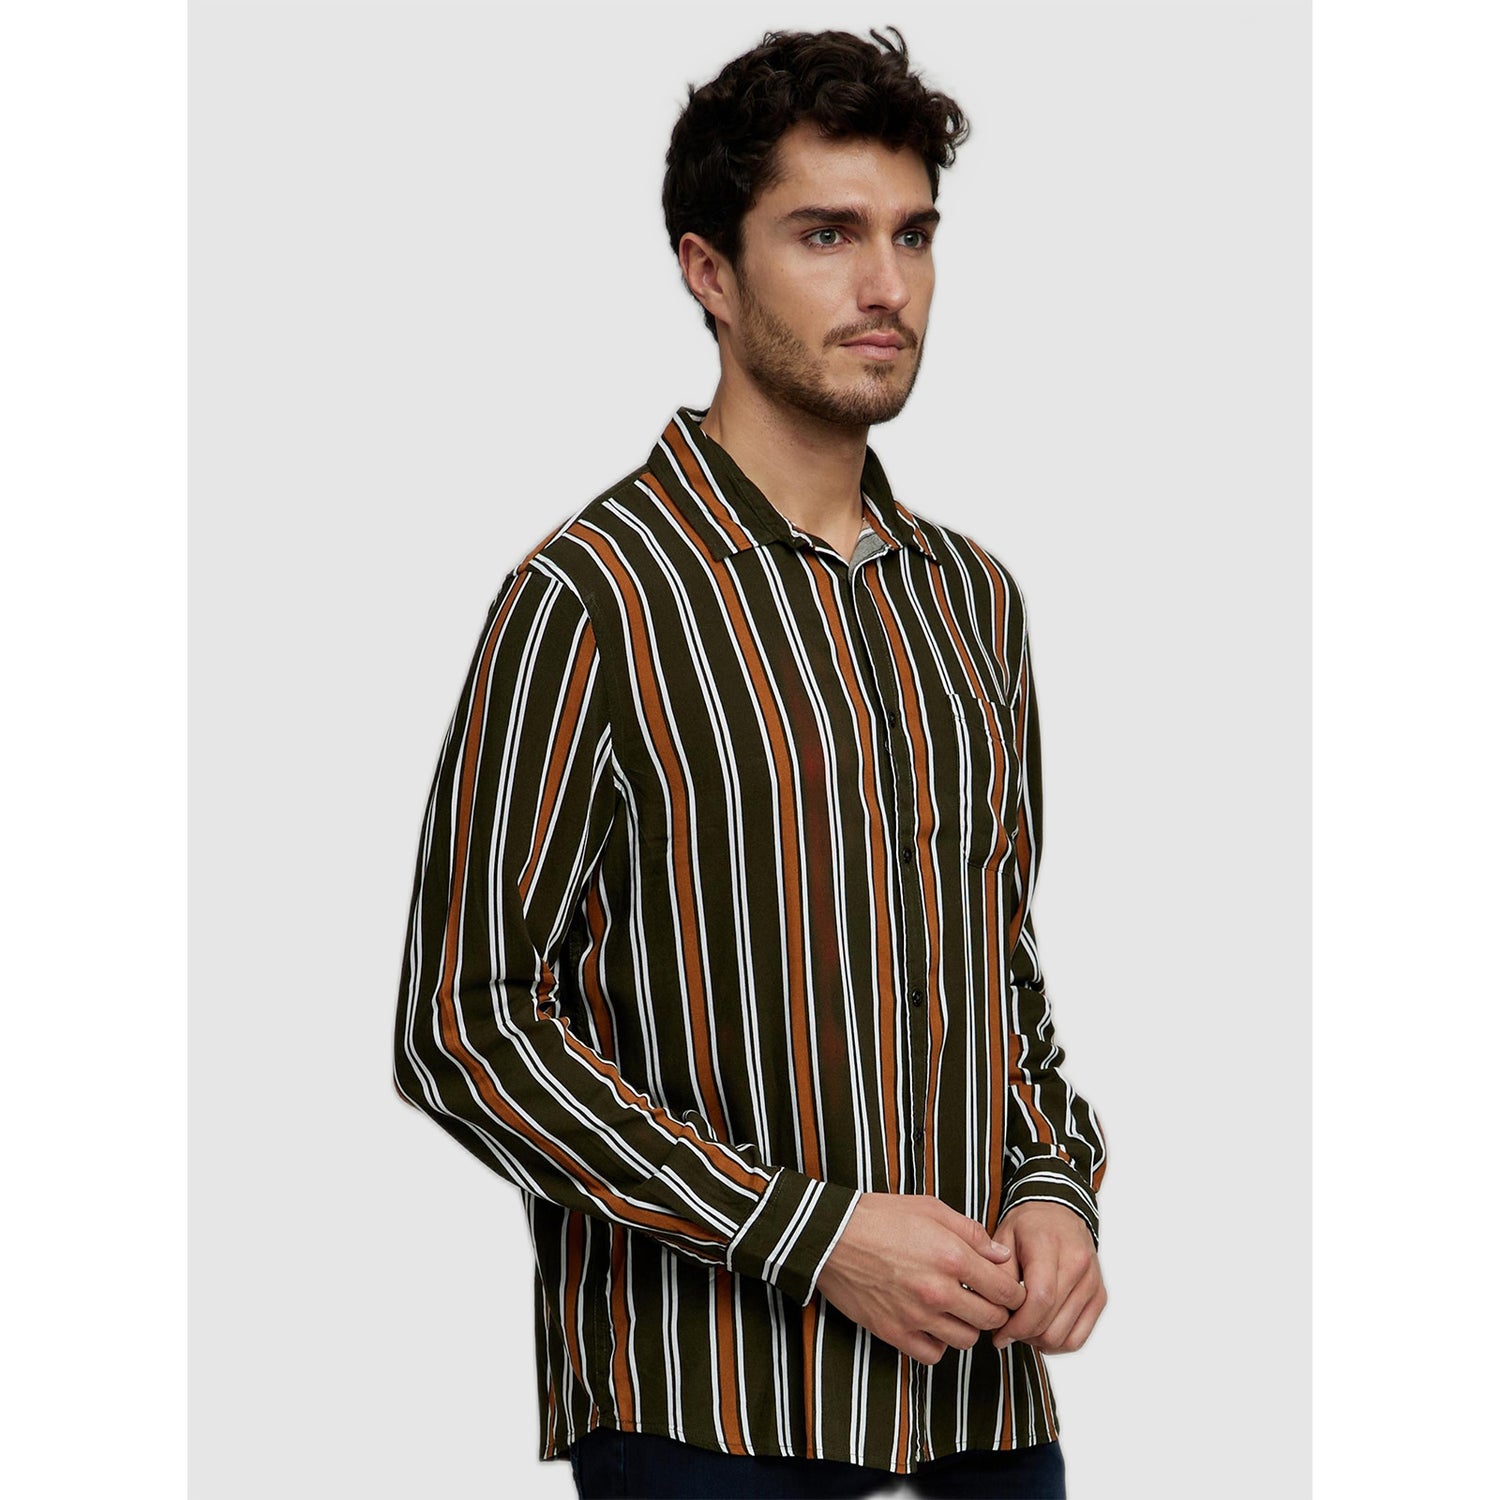 Men's Olive Stripes Casual Shirts (Various Sizes)